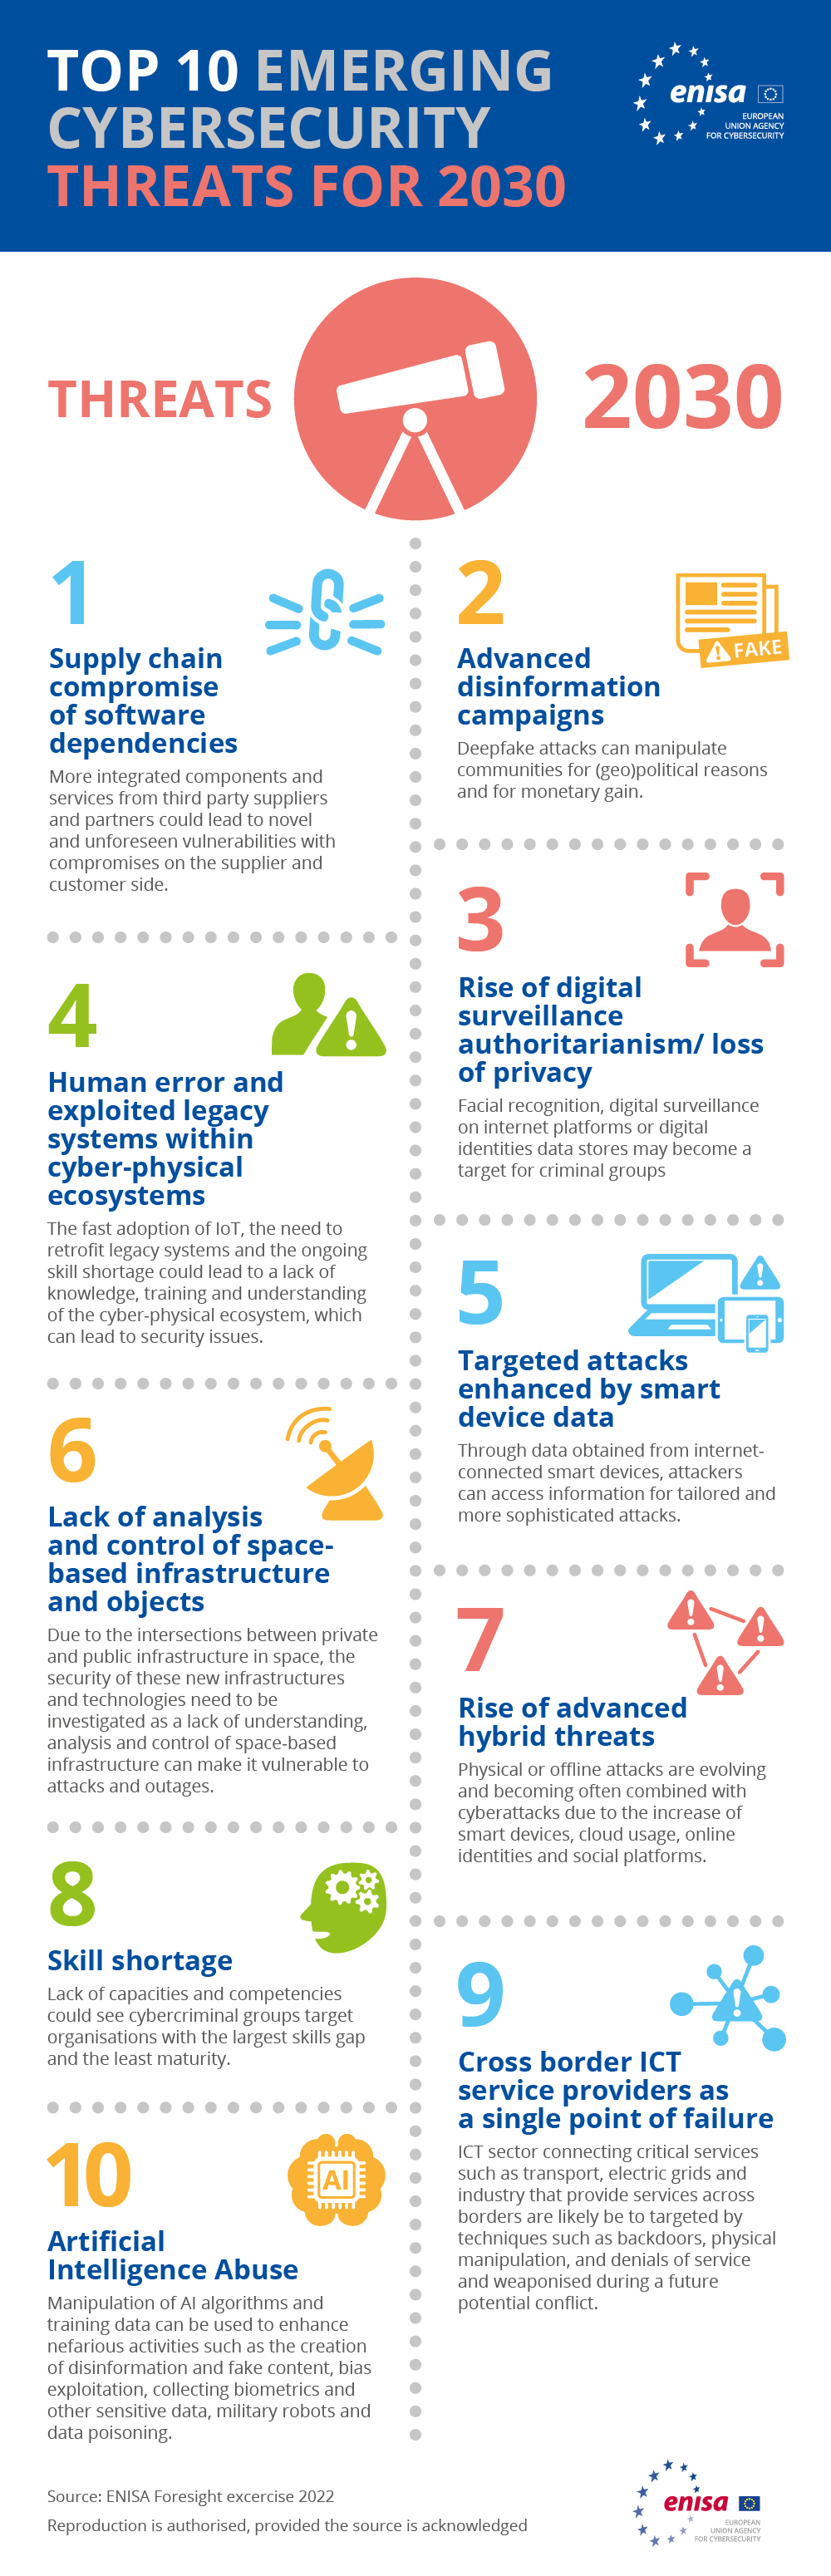 ENISA Top 10 Emerging Cybersecurity Threats For 2030